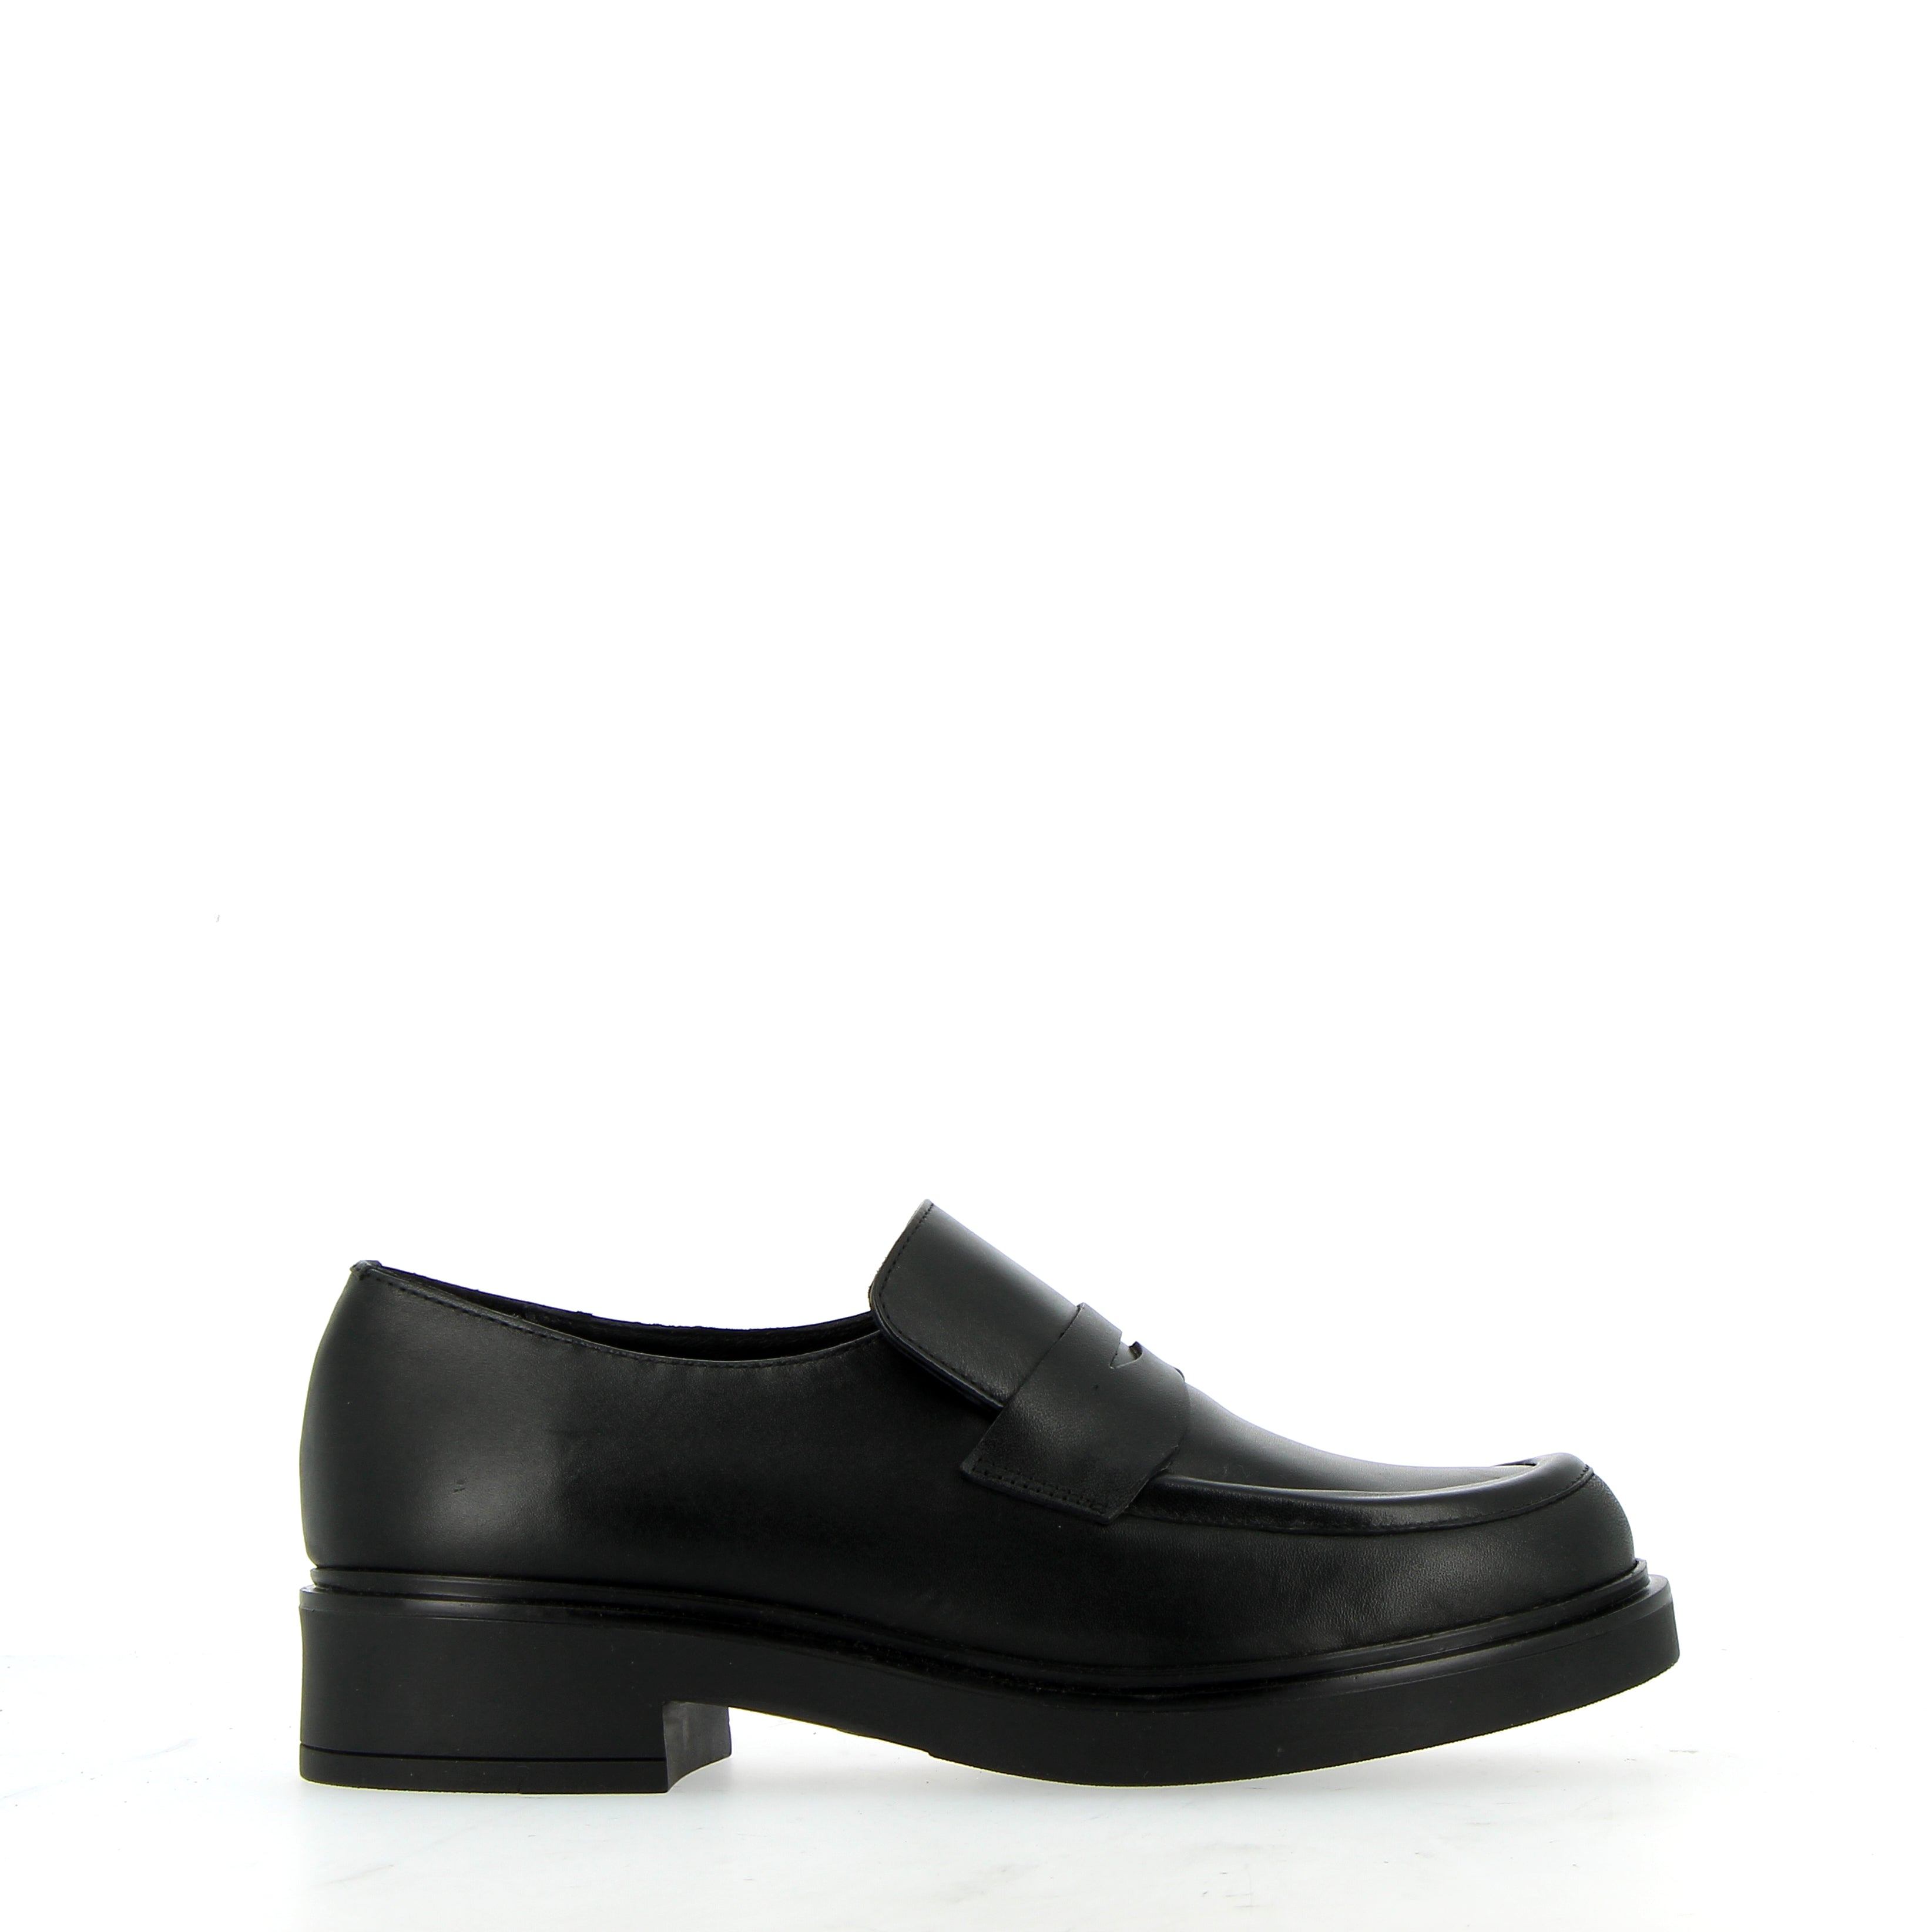 Black calf leather loafers